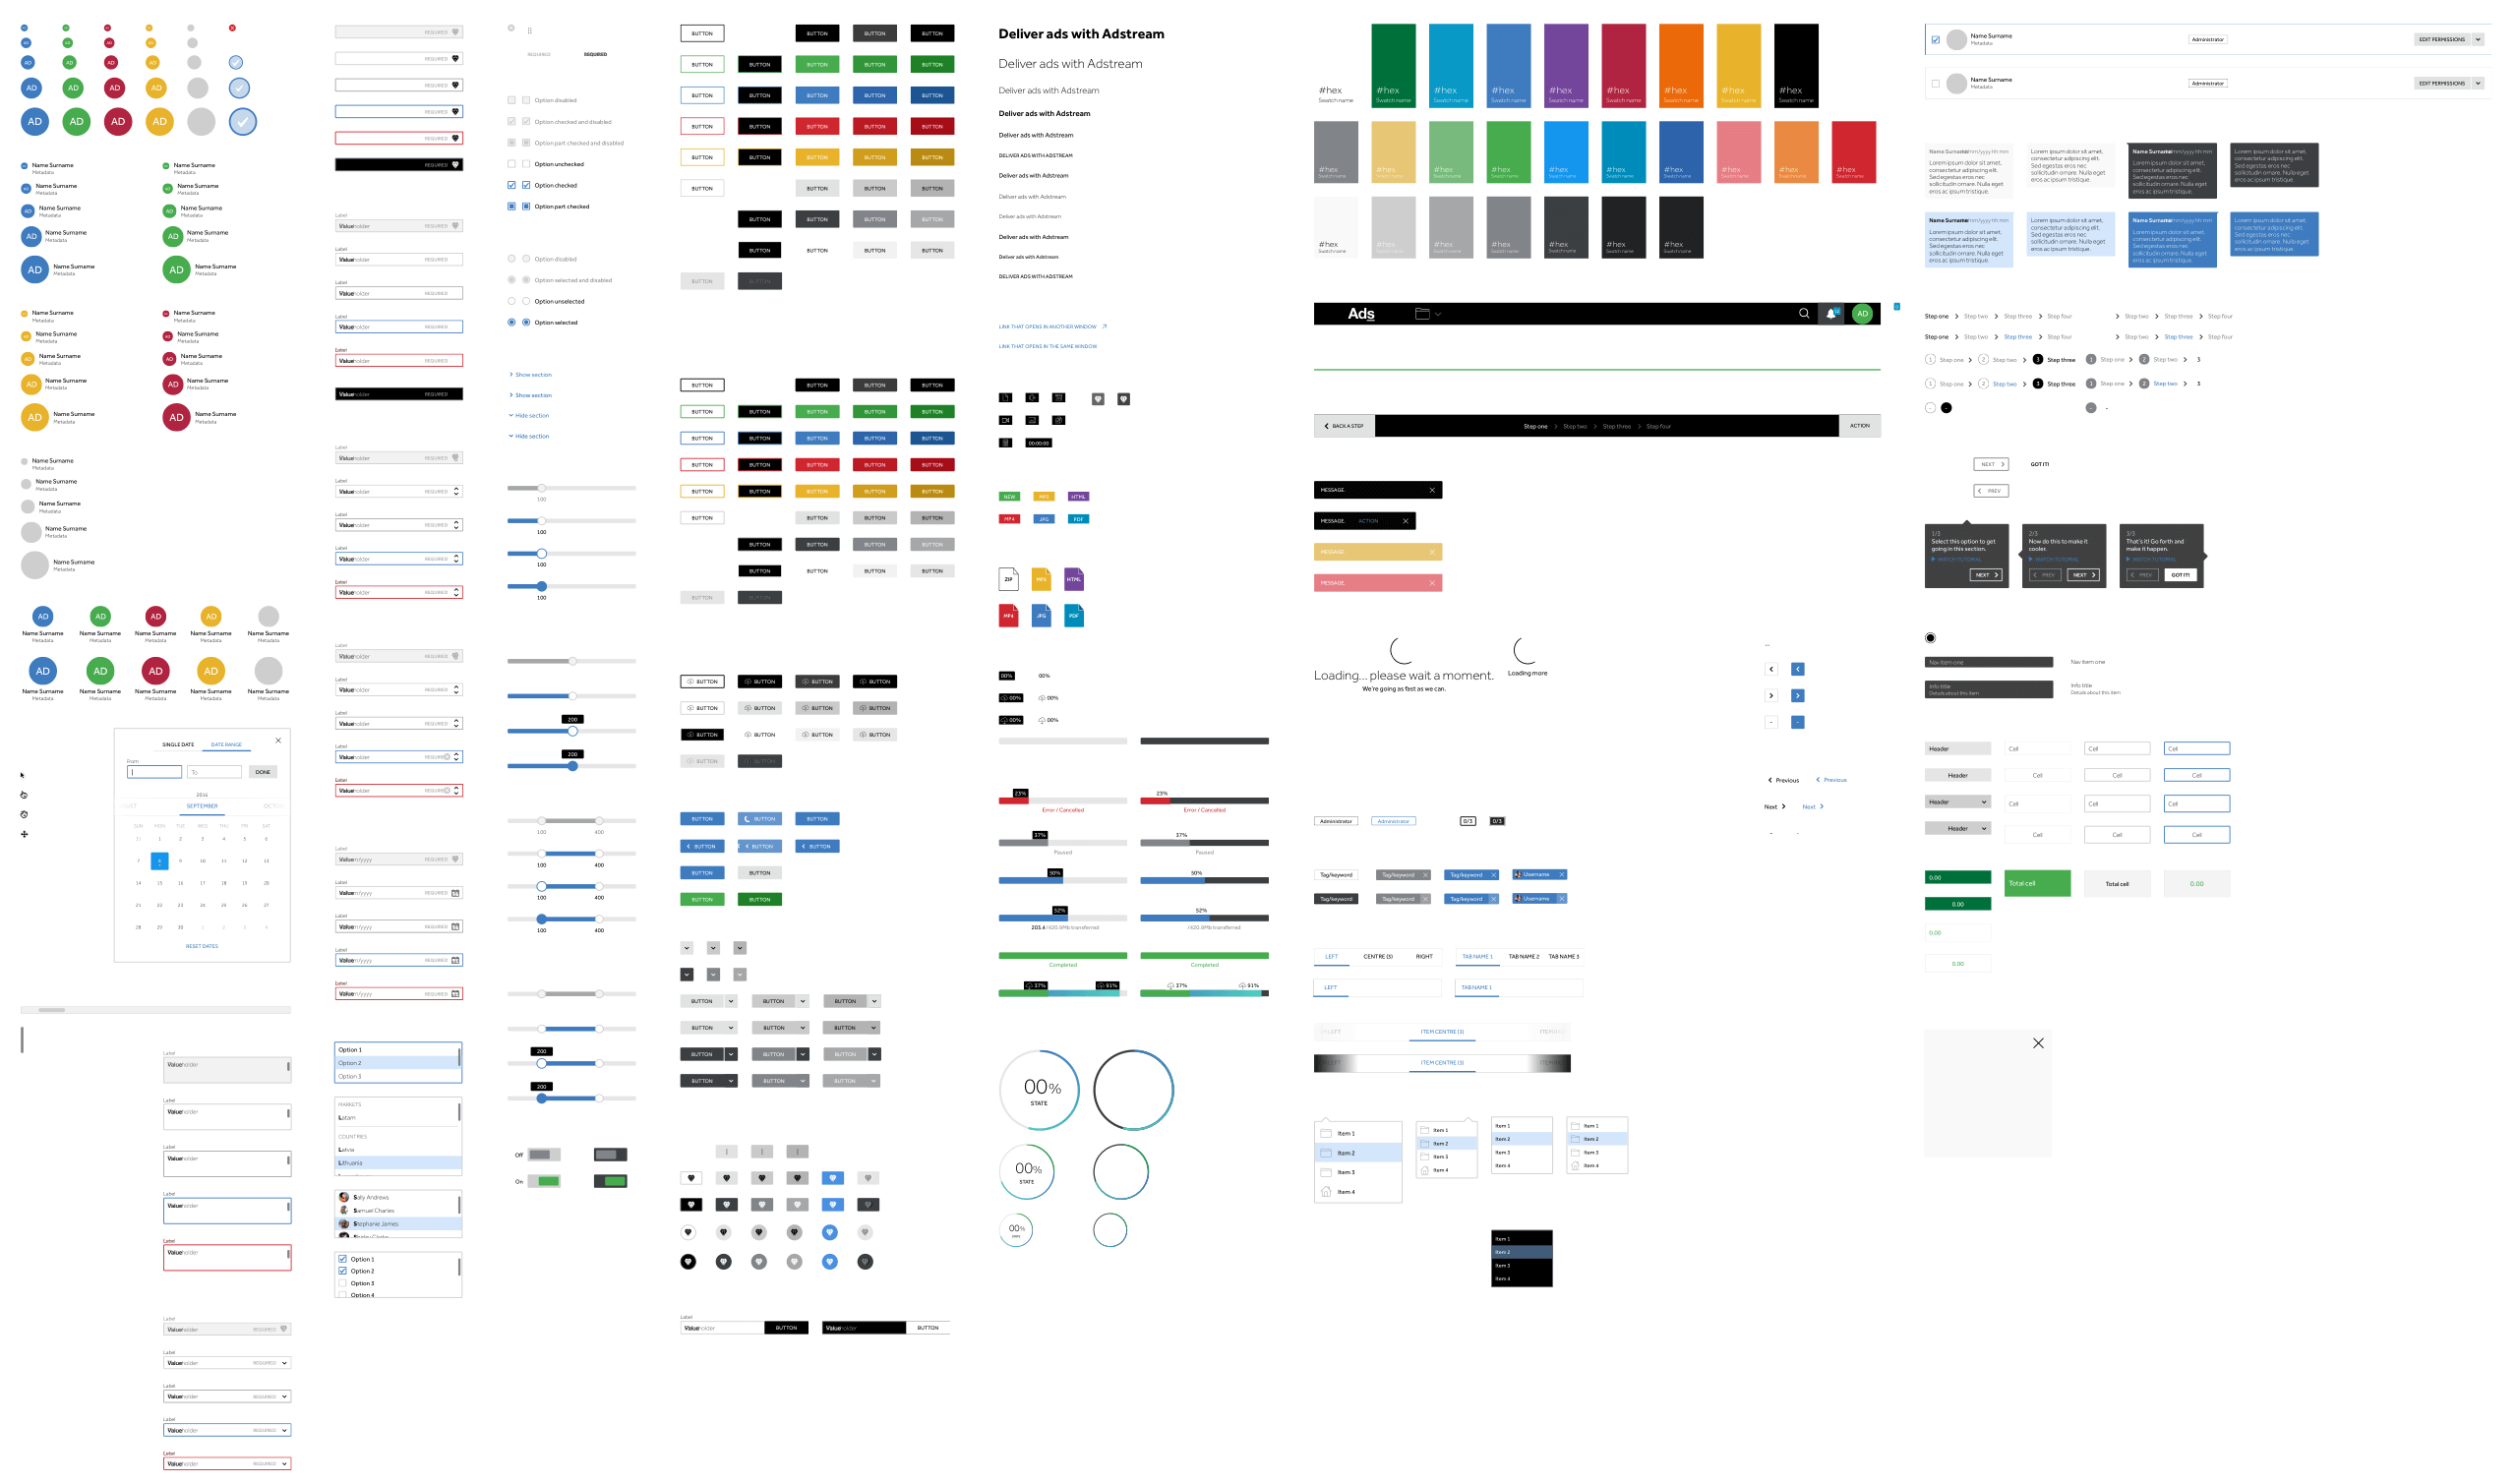 Image of components laid out across artboards in Sketch